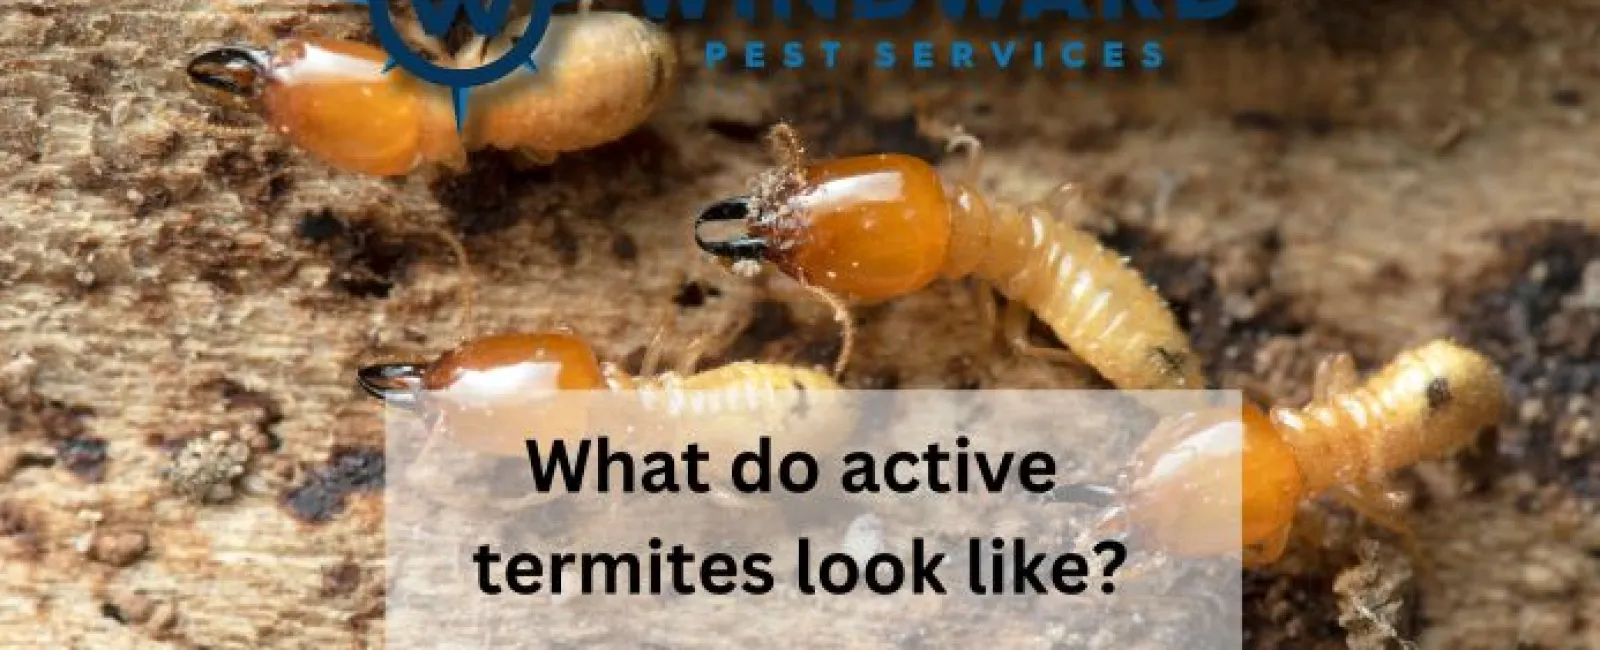 What do active termites look like?